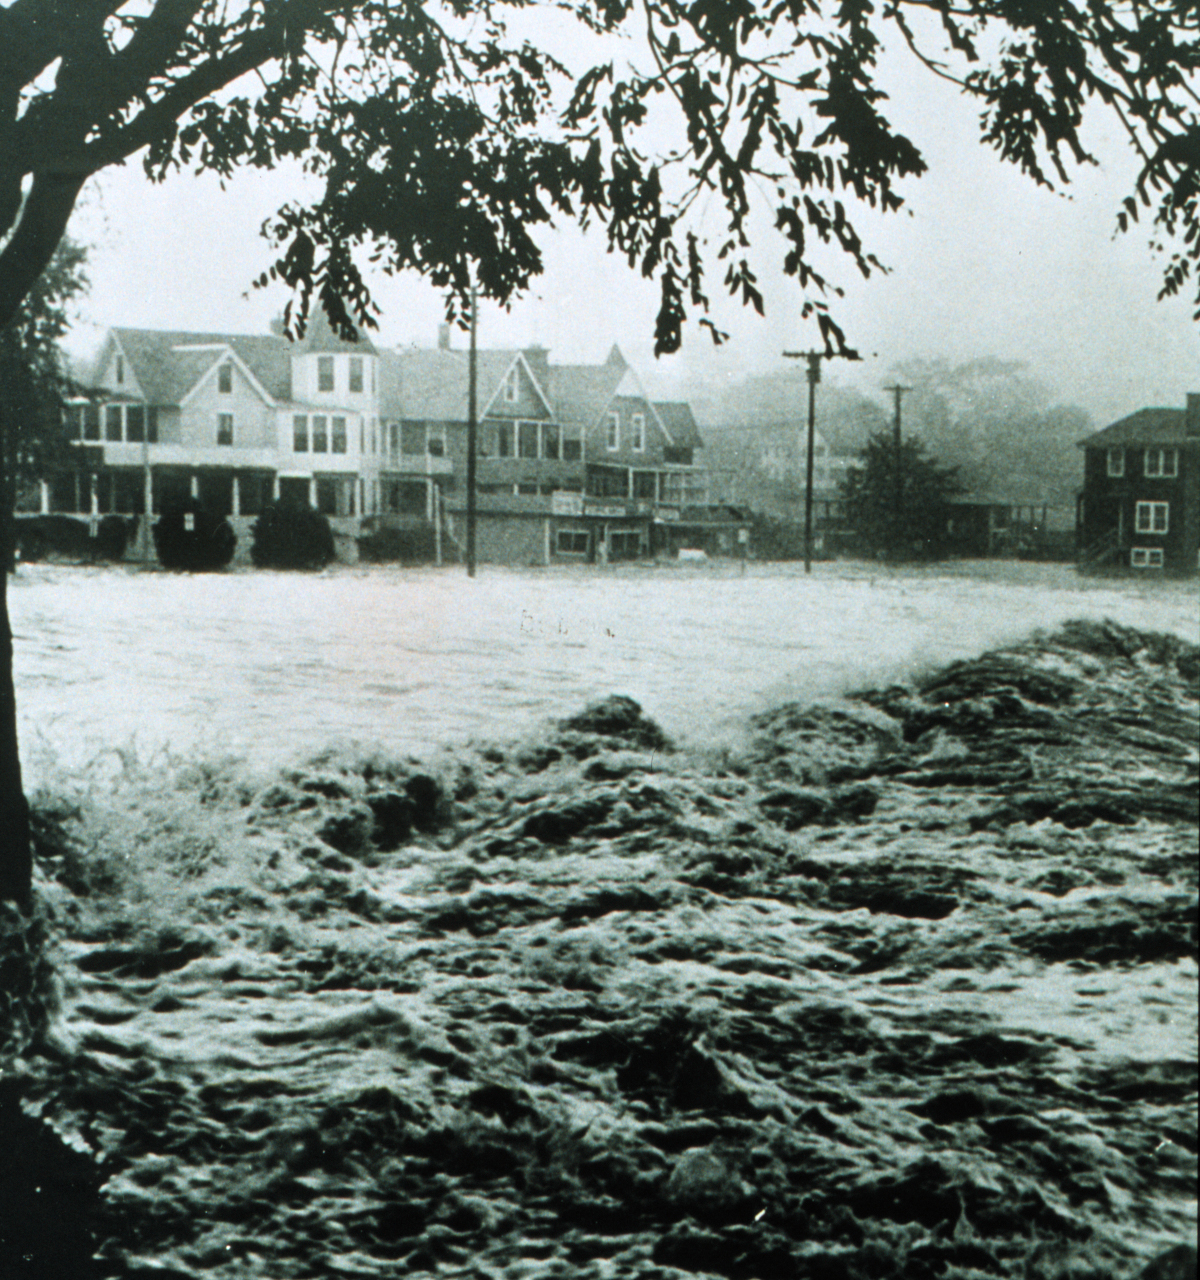 Flooding in the aftermath of Hurricane Carol